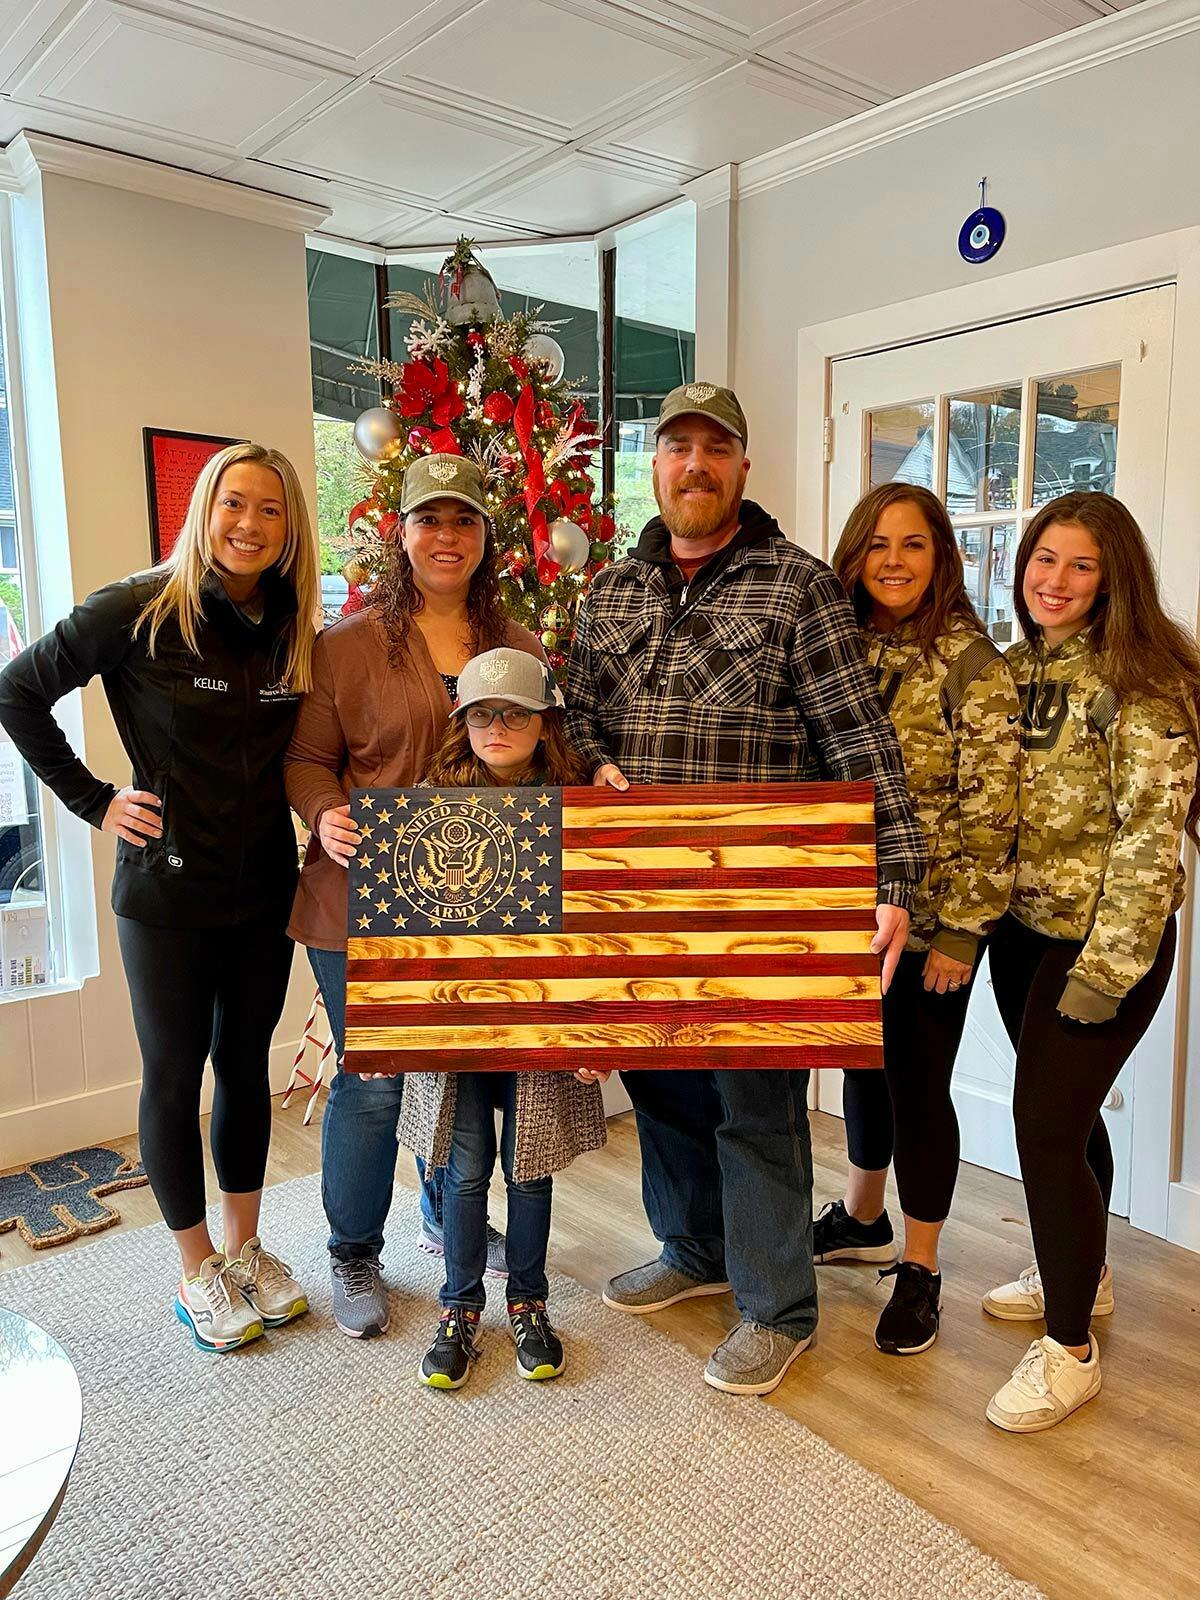 JK Consulting partners and brand director with Veteran Robert Engel and his family. (Pictured from left to right: Kelley Henneberry, Katelin, Penelope and Robert Engel, Jennifer Pinto, and Diana Girimonti.) Photo courtesy JK Consulting.